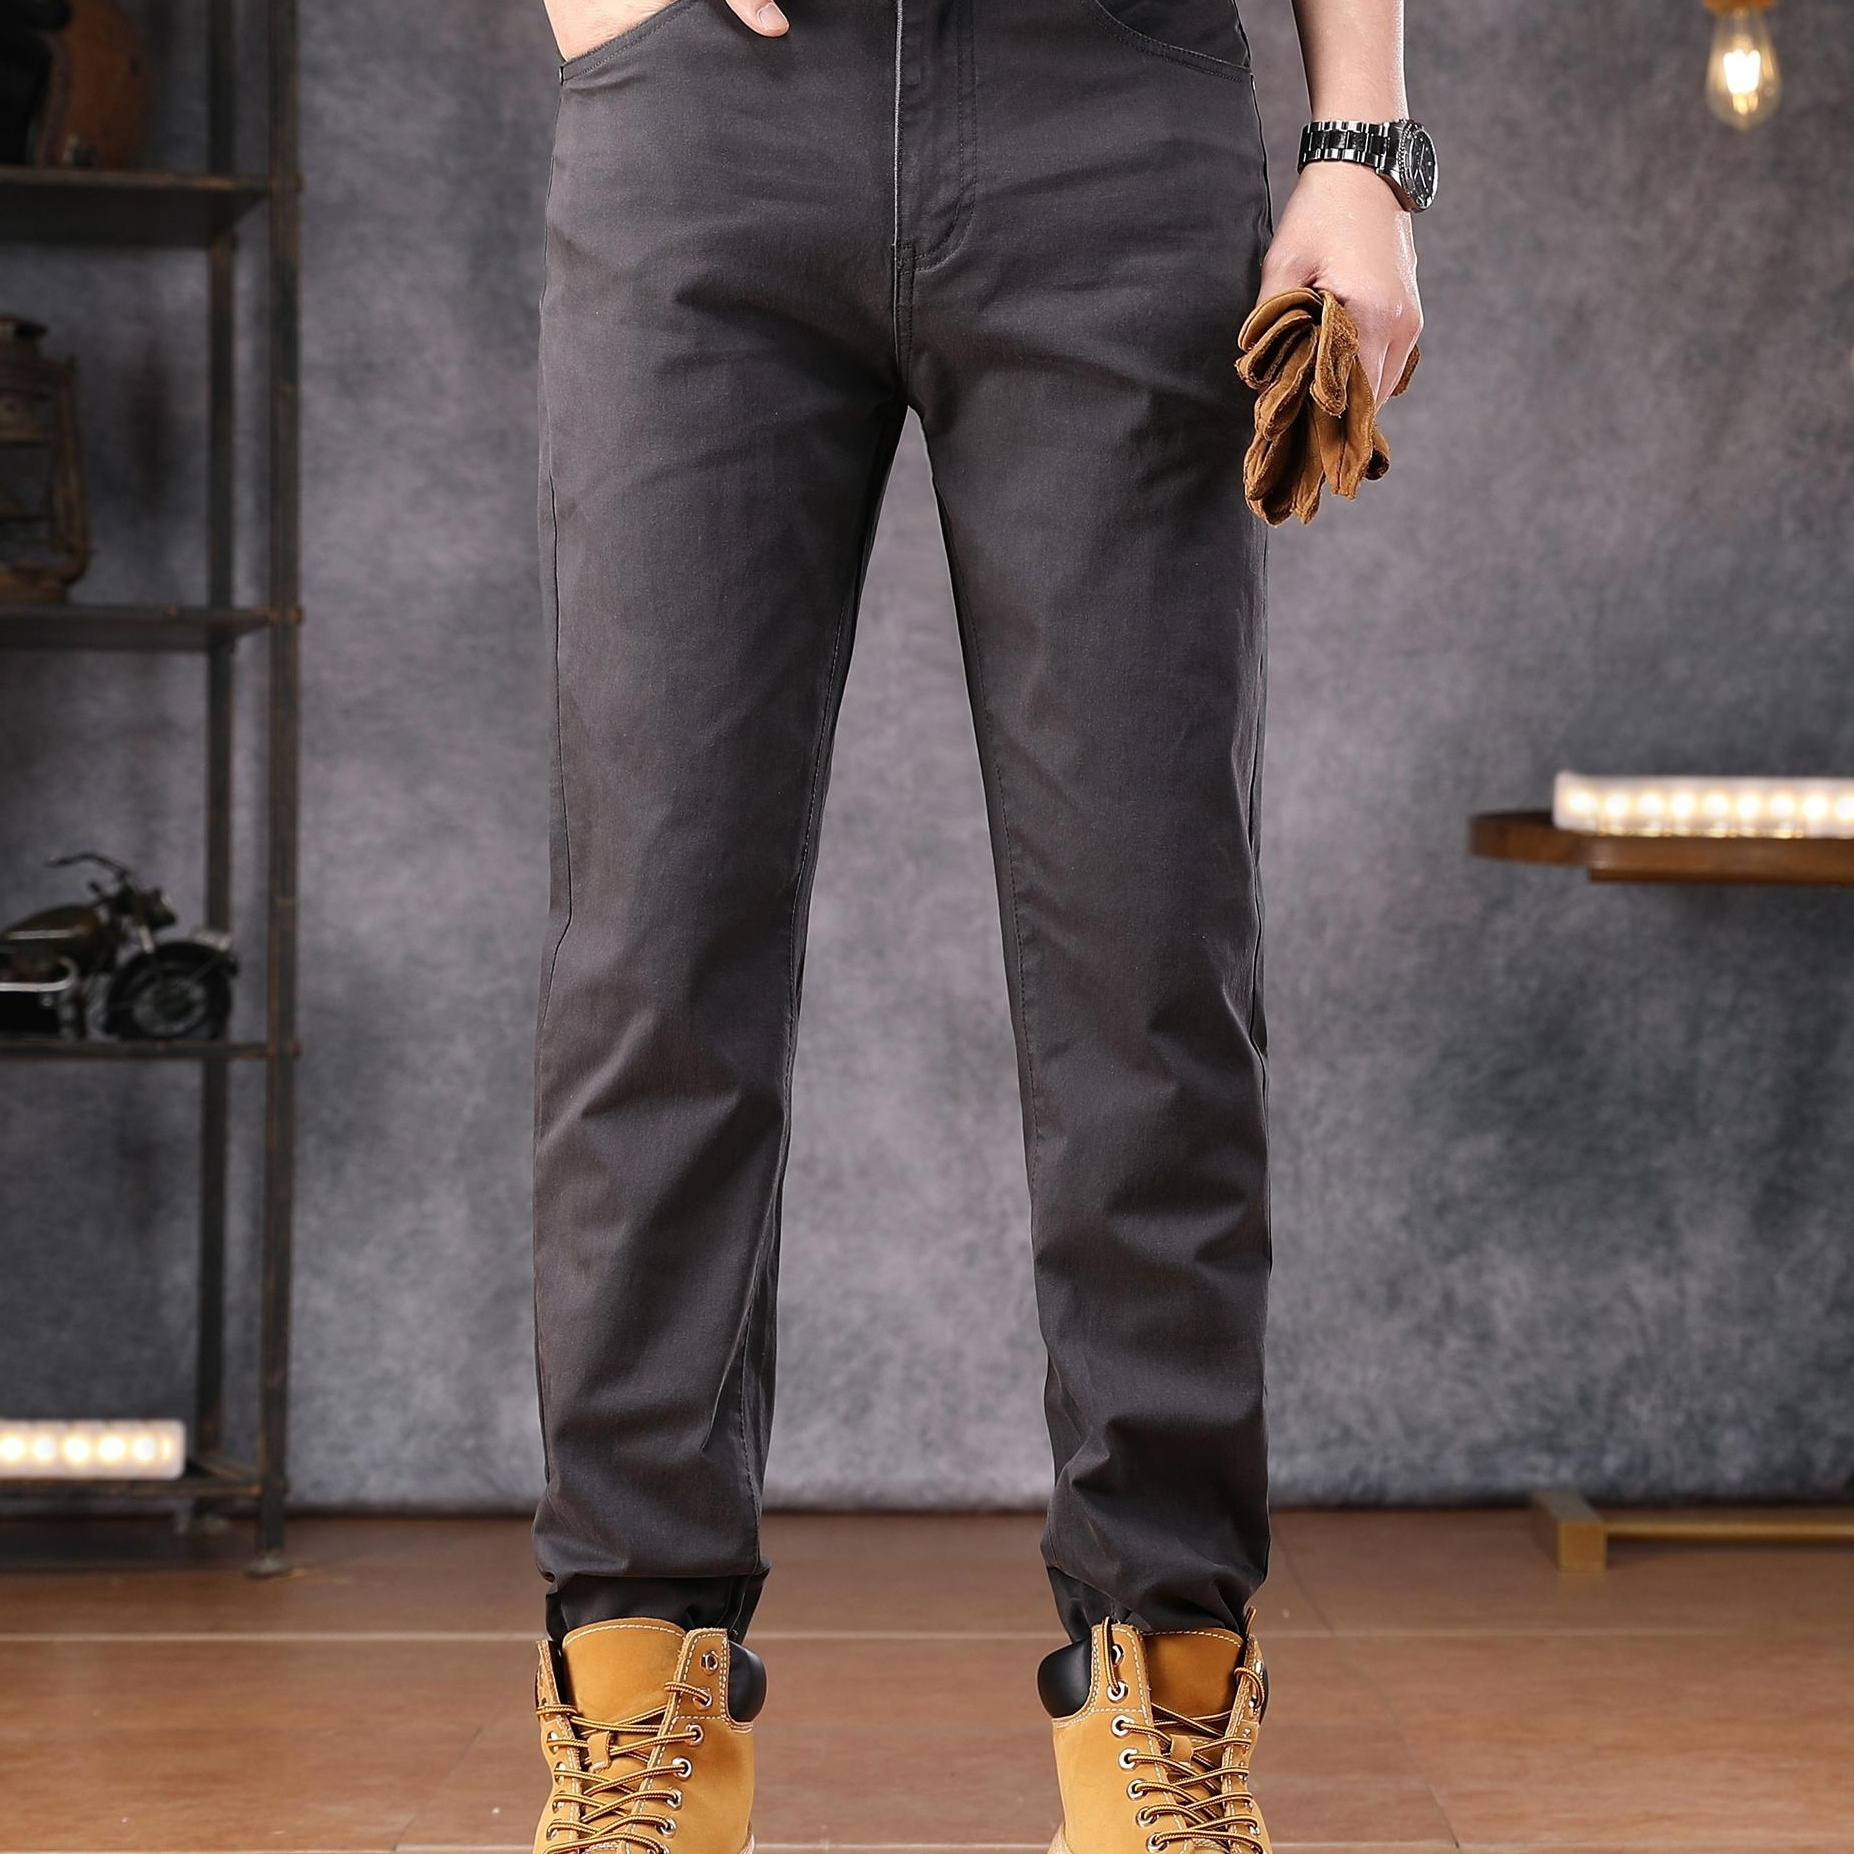 Summer Ankle-Length Casual Pants Men Thin Classic Style Fashion Slim  Straight Cotton Brand Clothing Solid Color Trousers Male